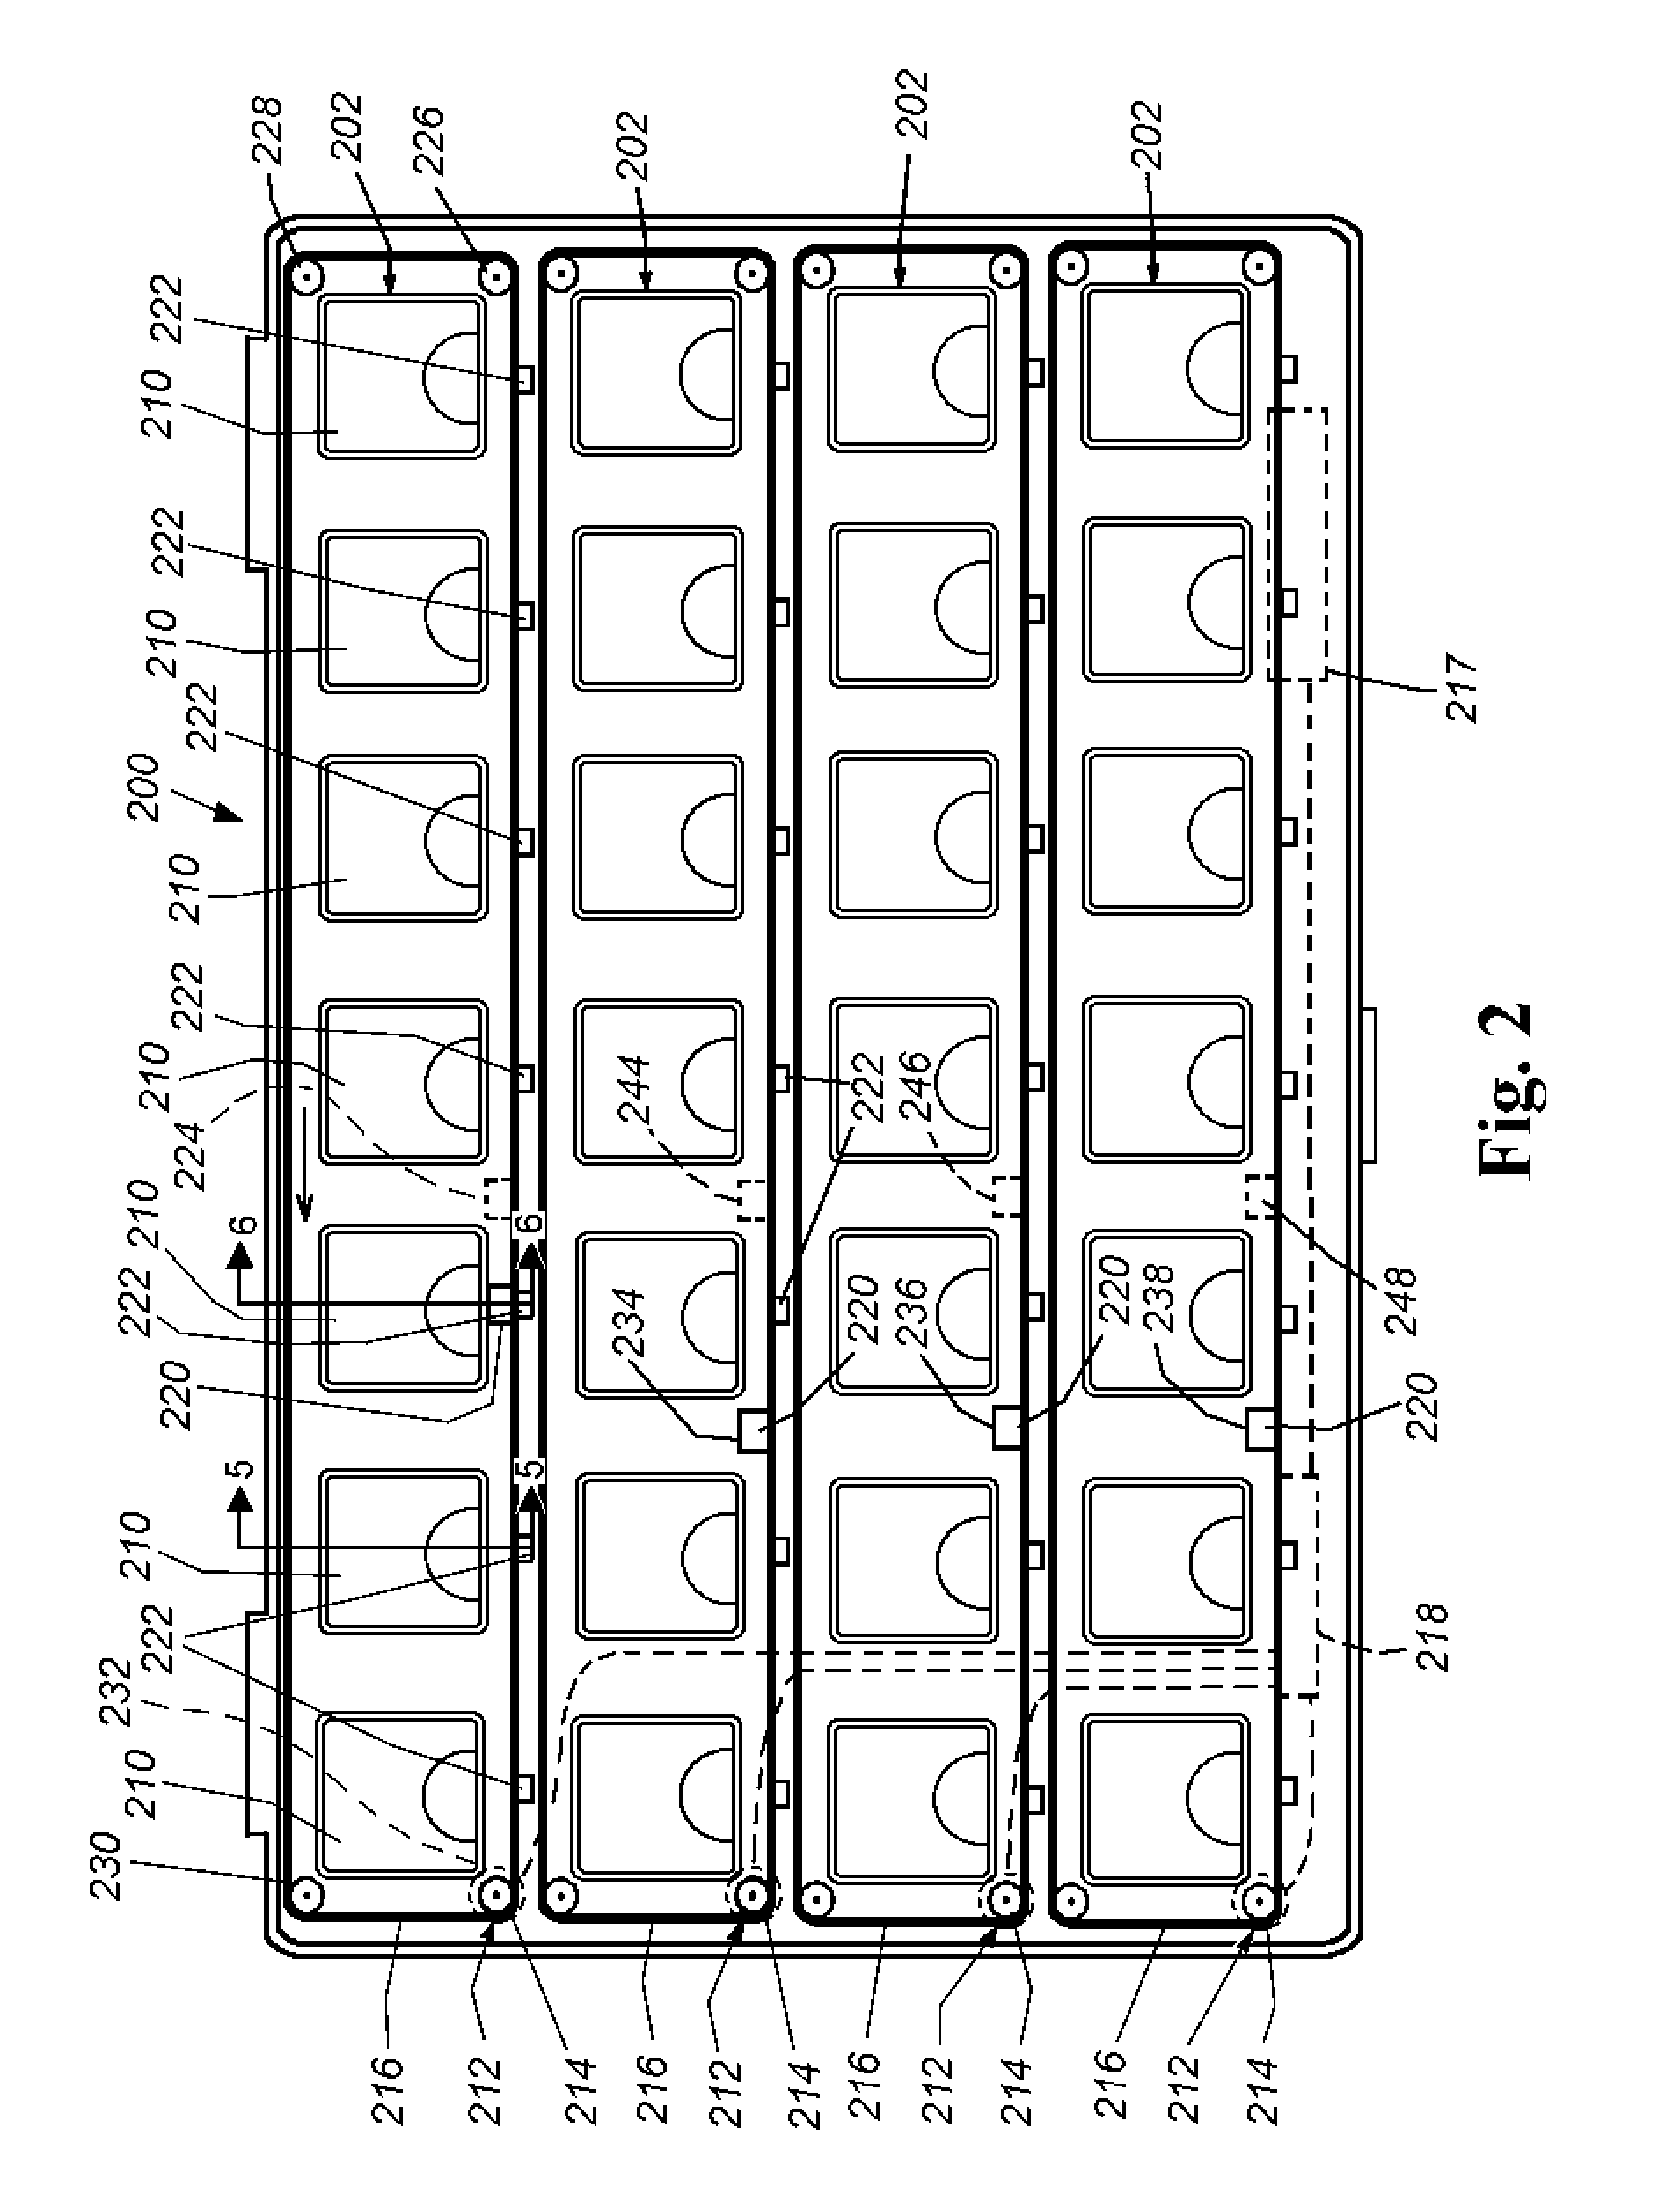 Interactive medication dispensing system with locking compartments